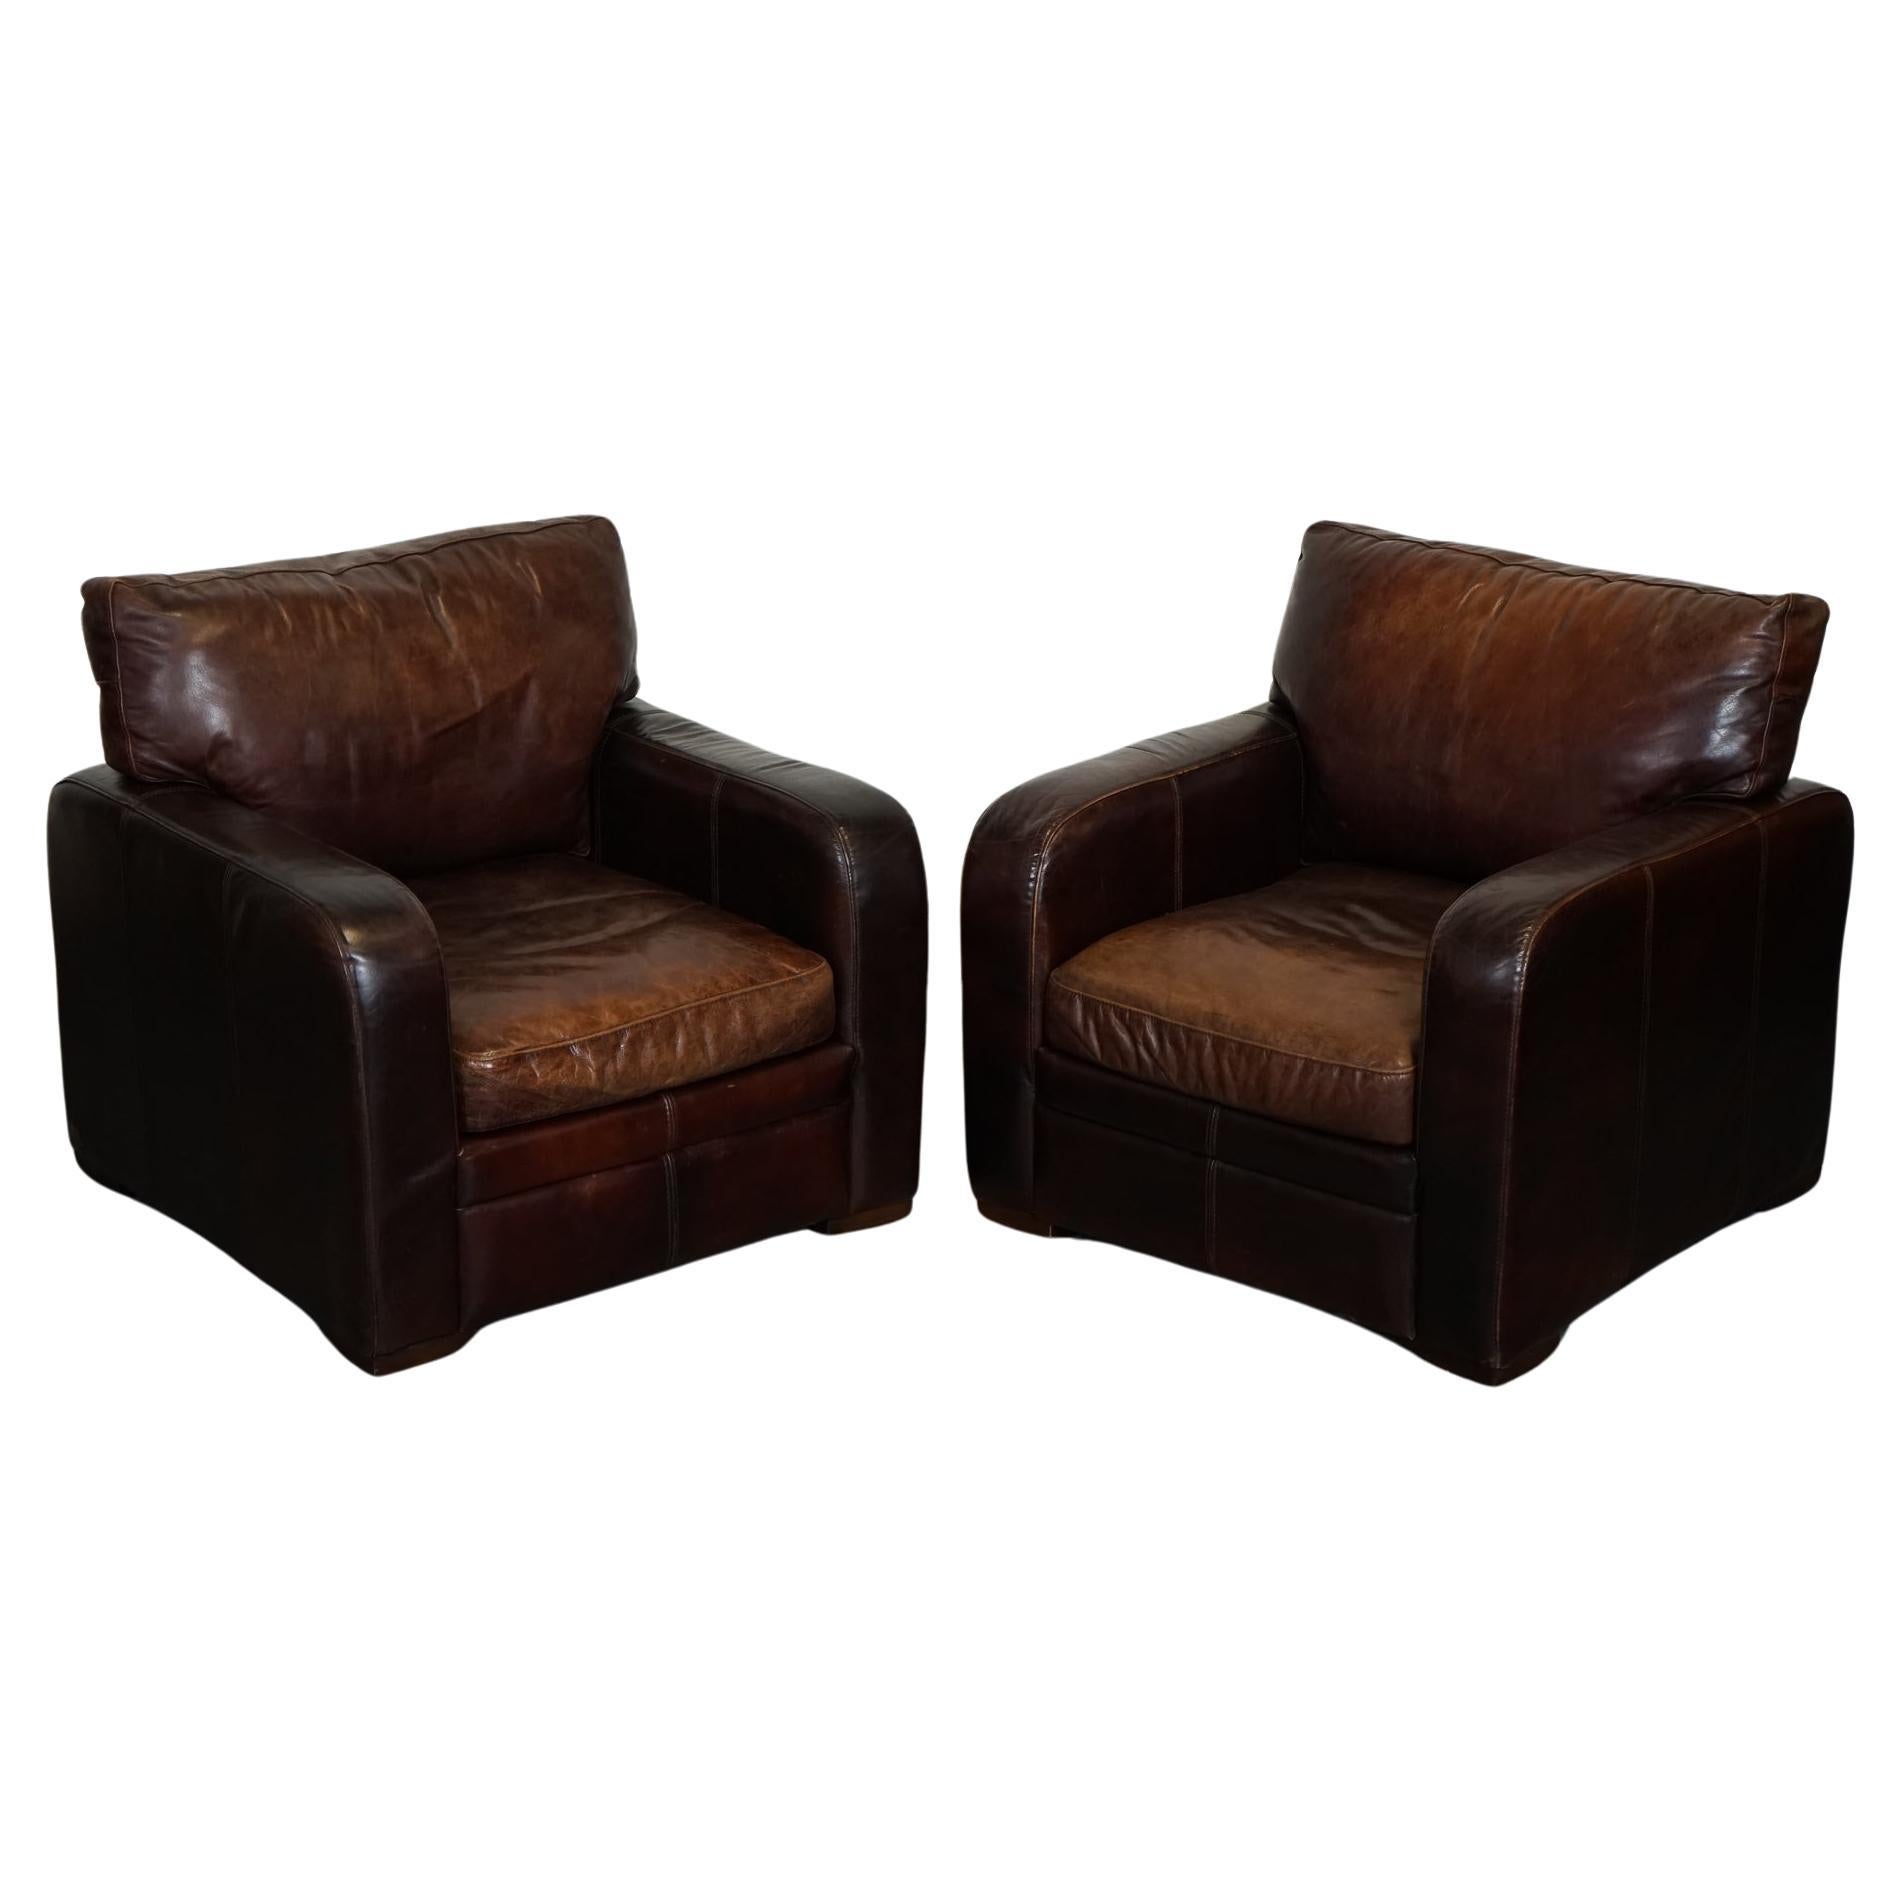 STUNNiNG VINTAGE PAIR HALO BROWN AGED LEATHER CLUB ARMCHAIRS J1